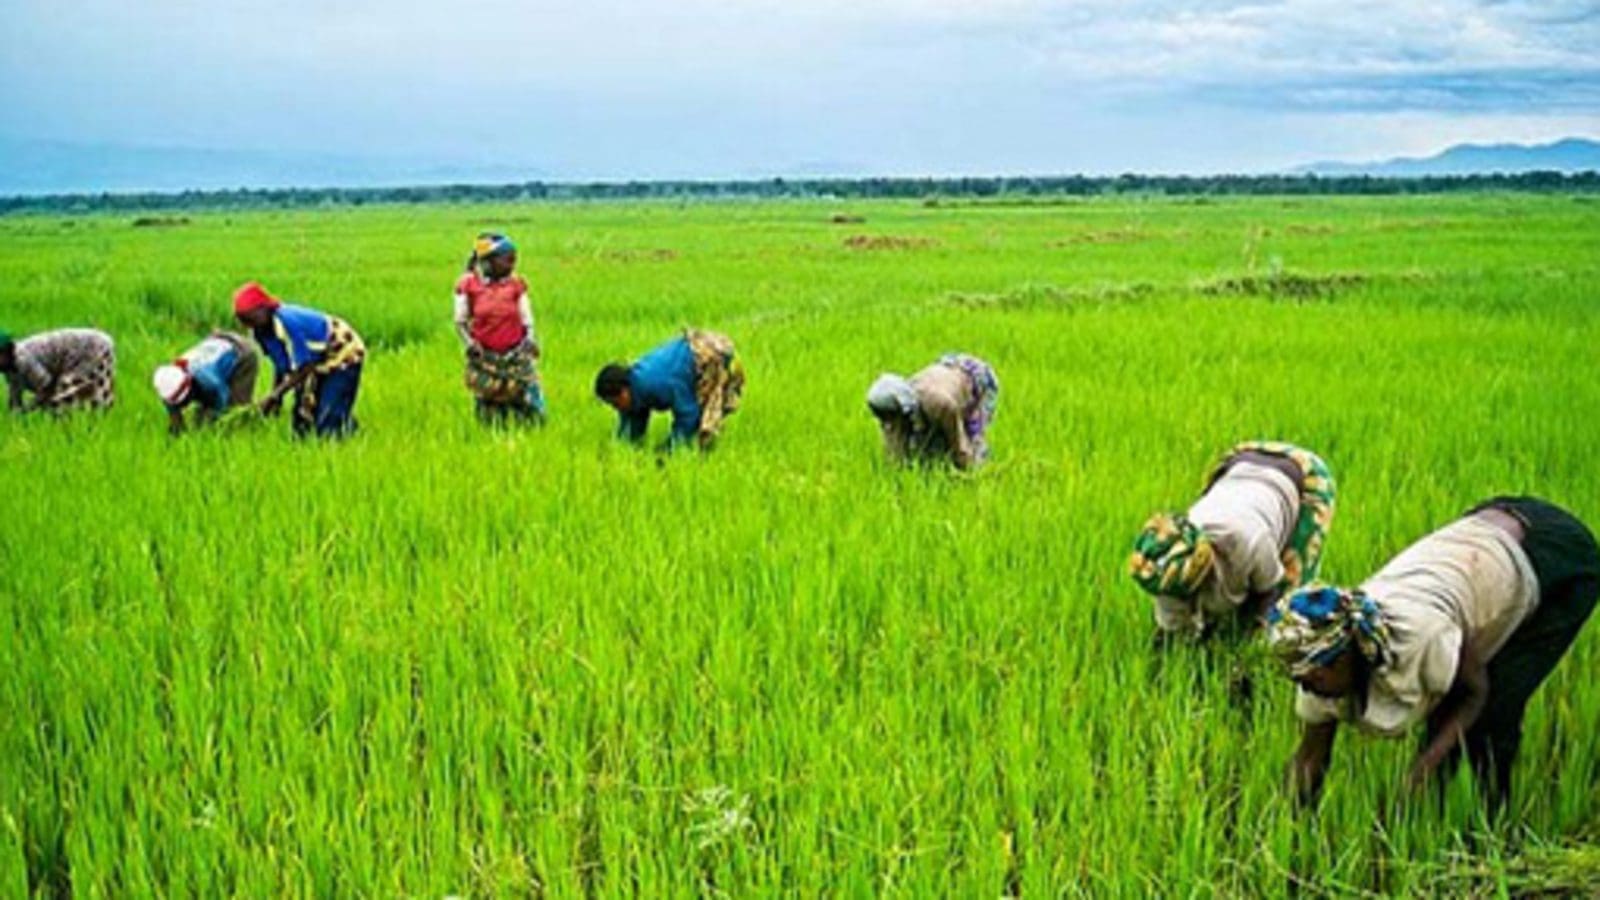 Ghana schemes to offset US$1.3 billion rice import bill by increasing local production